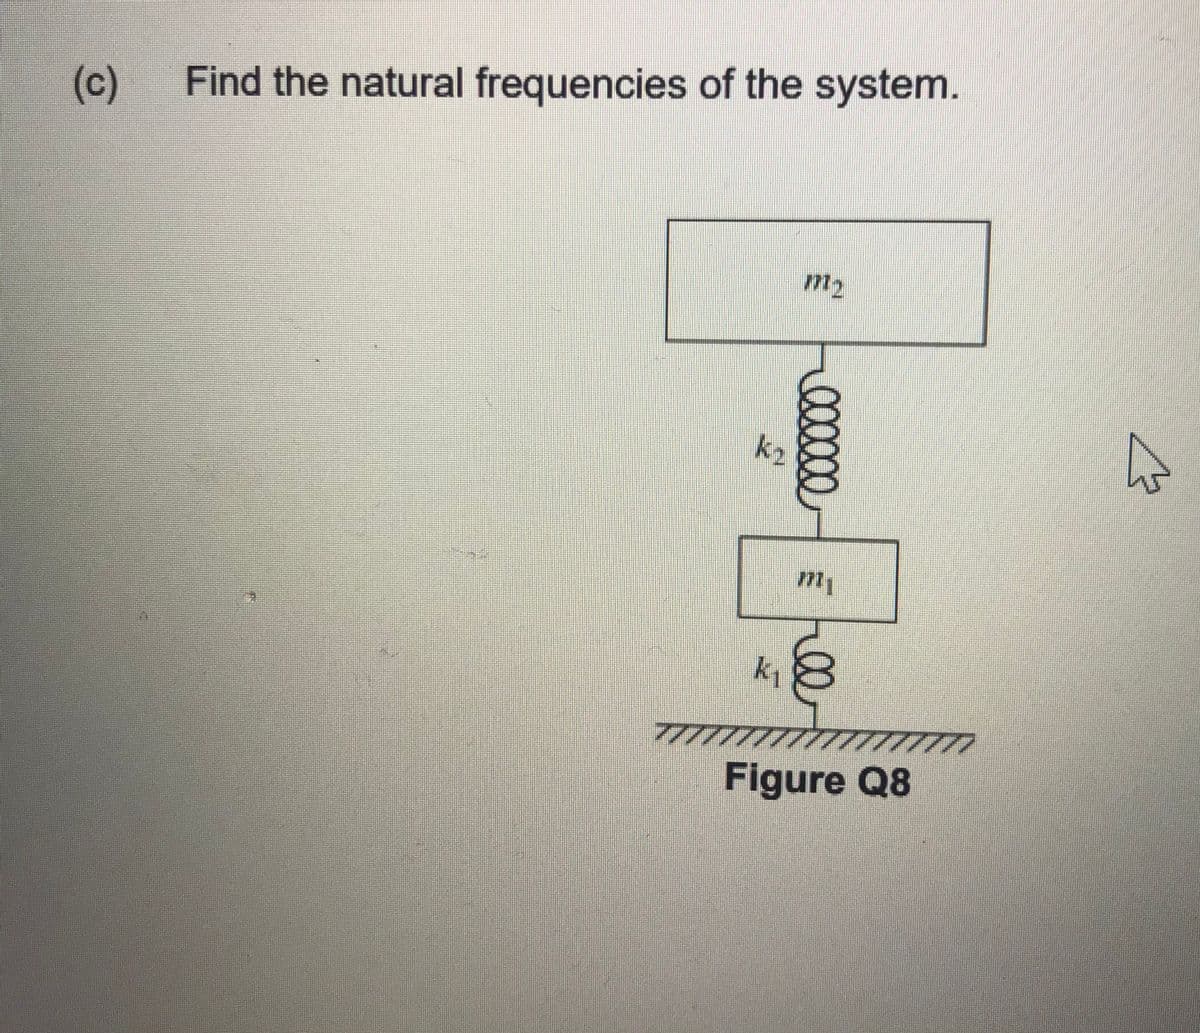 (c)
Find the natural frequencies of the system.
m1
k
Figure Q8
